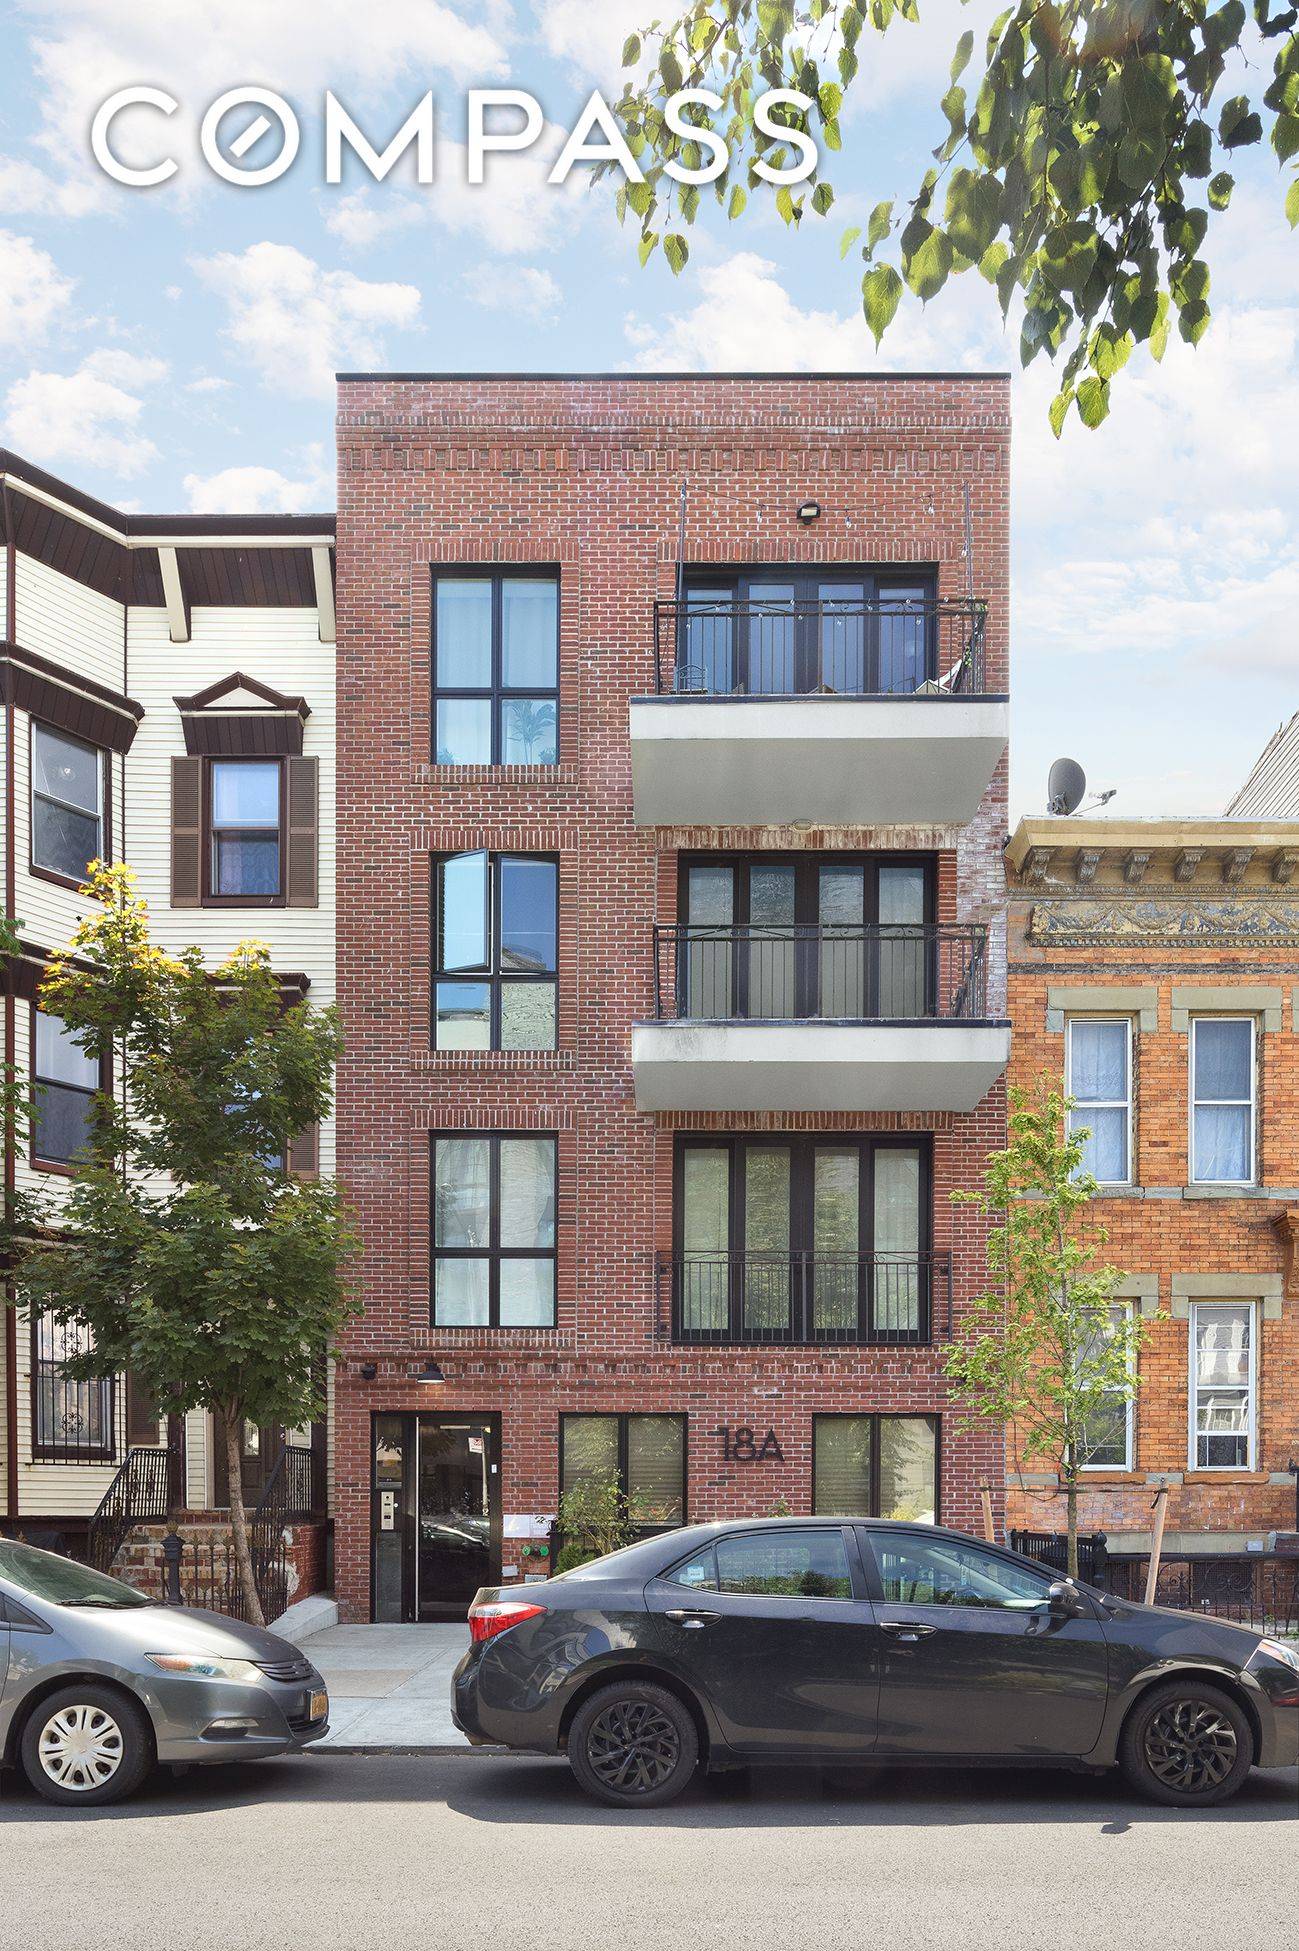 18A Bleecker is a newly developed high end 8 unit multifamily constructed in 2016.